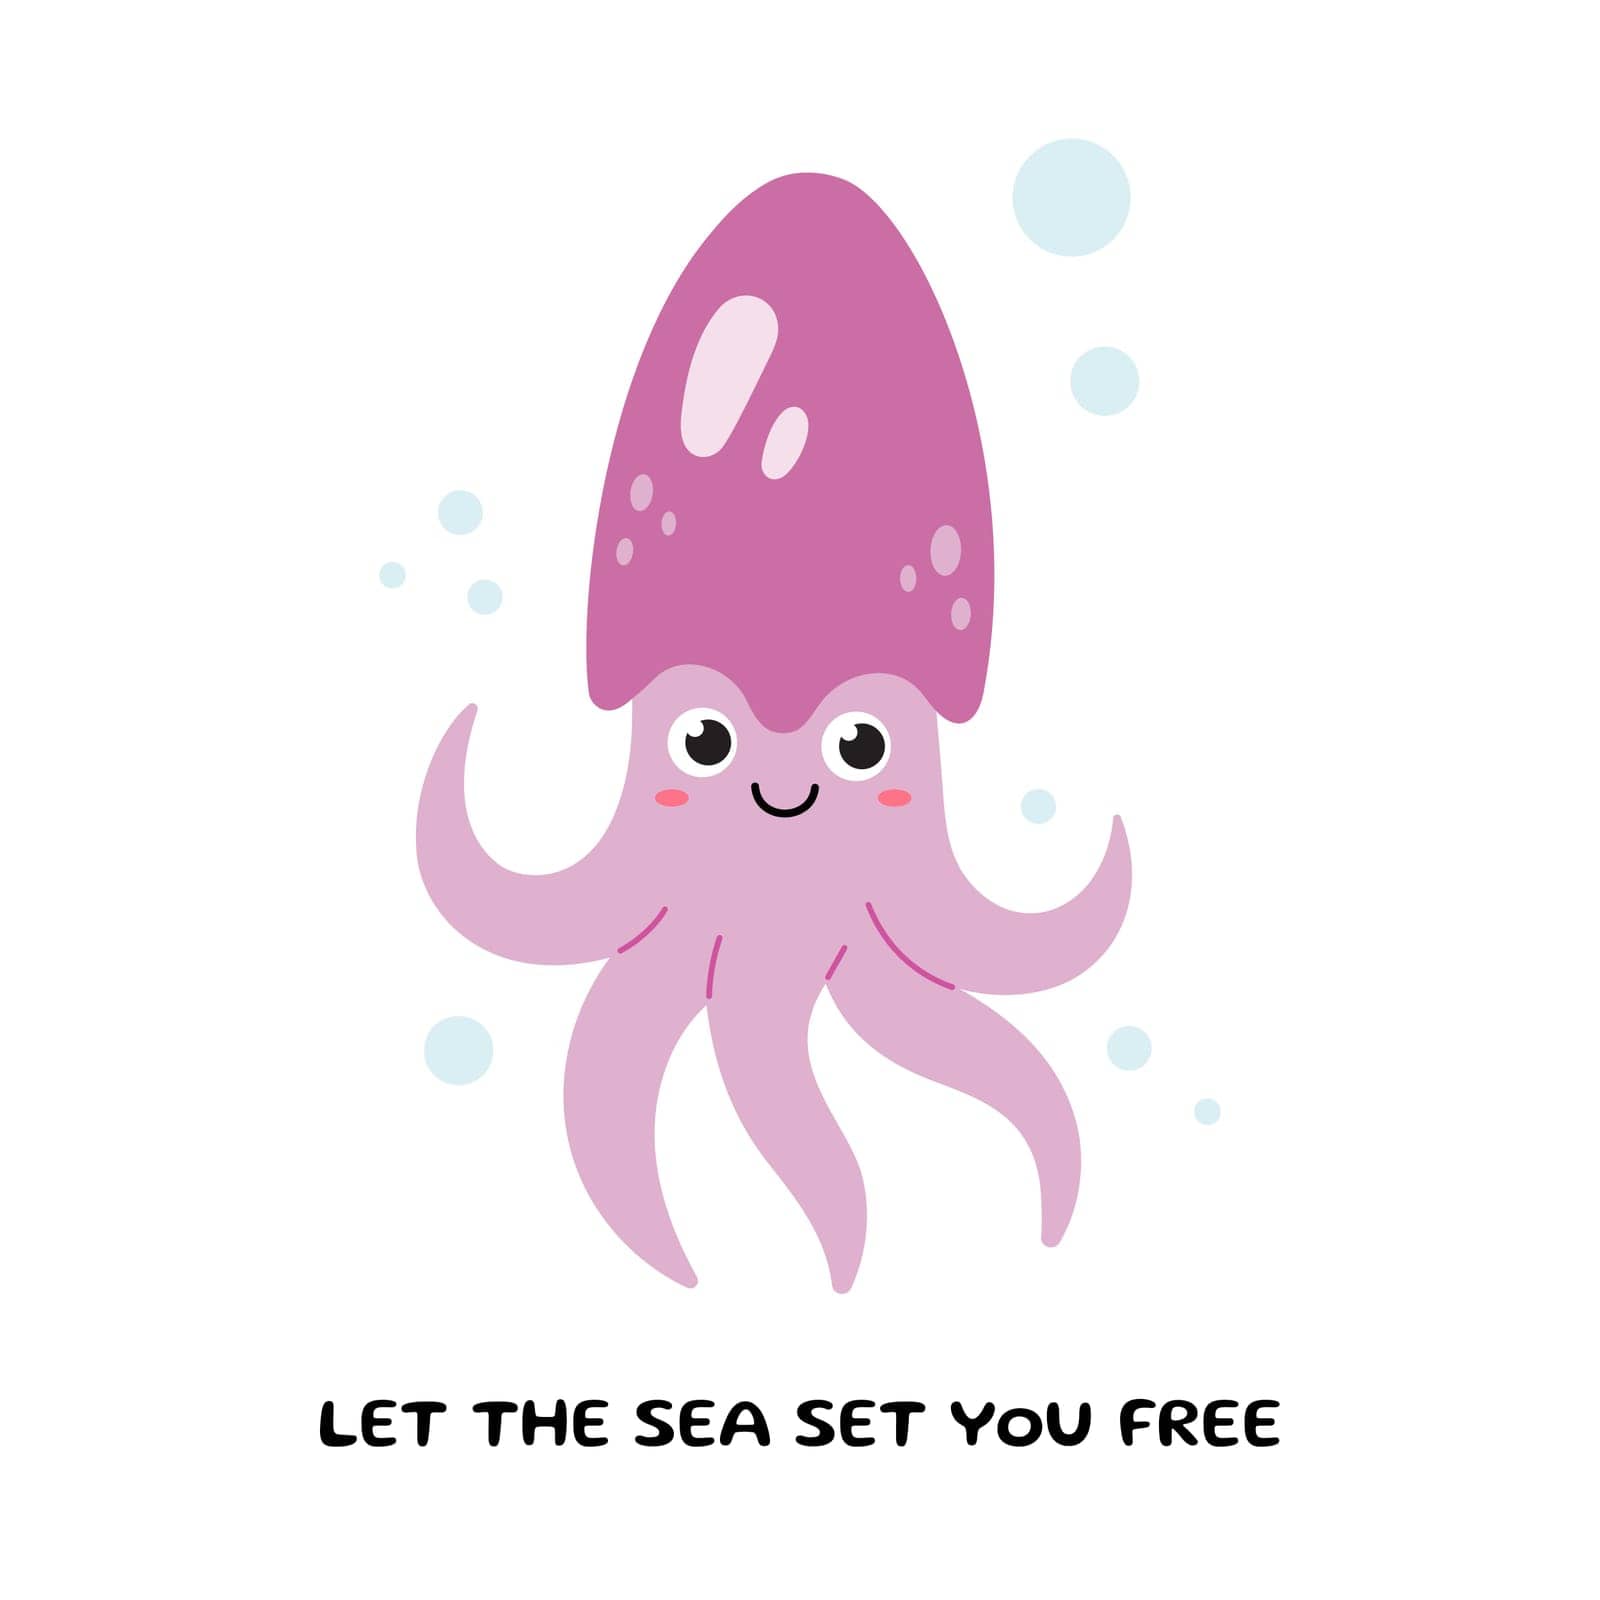 Cute cartoon octopus. Postcard with devilfish. Vector illustration of a poulpe. Kids illustration in cartoon style by KateArtery19